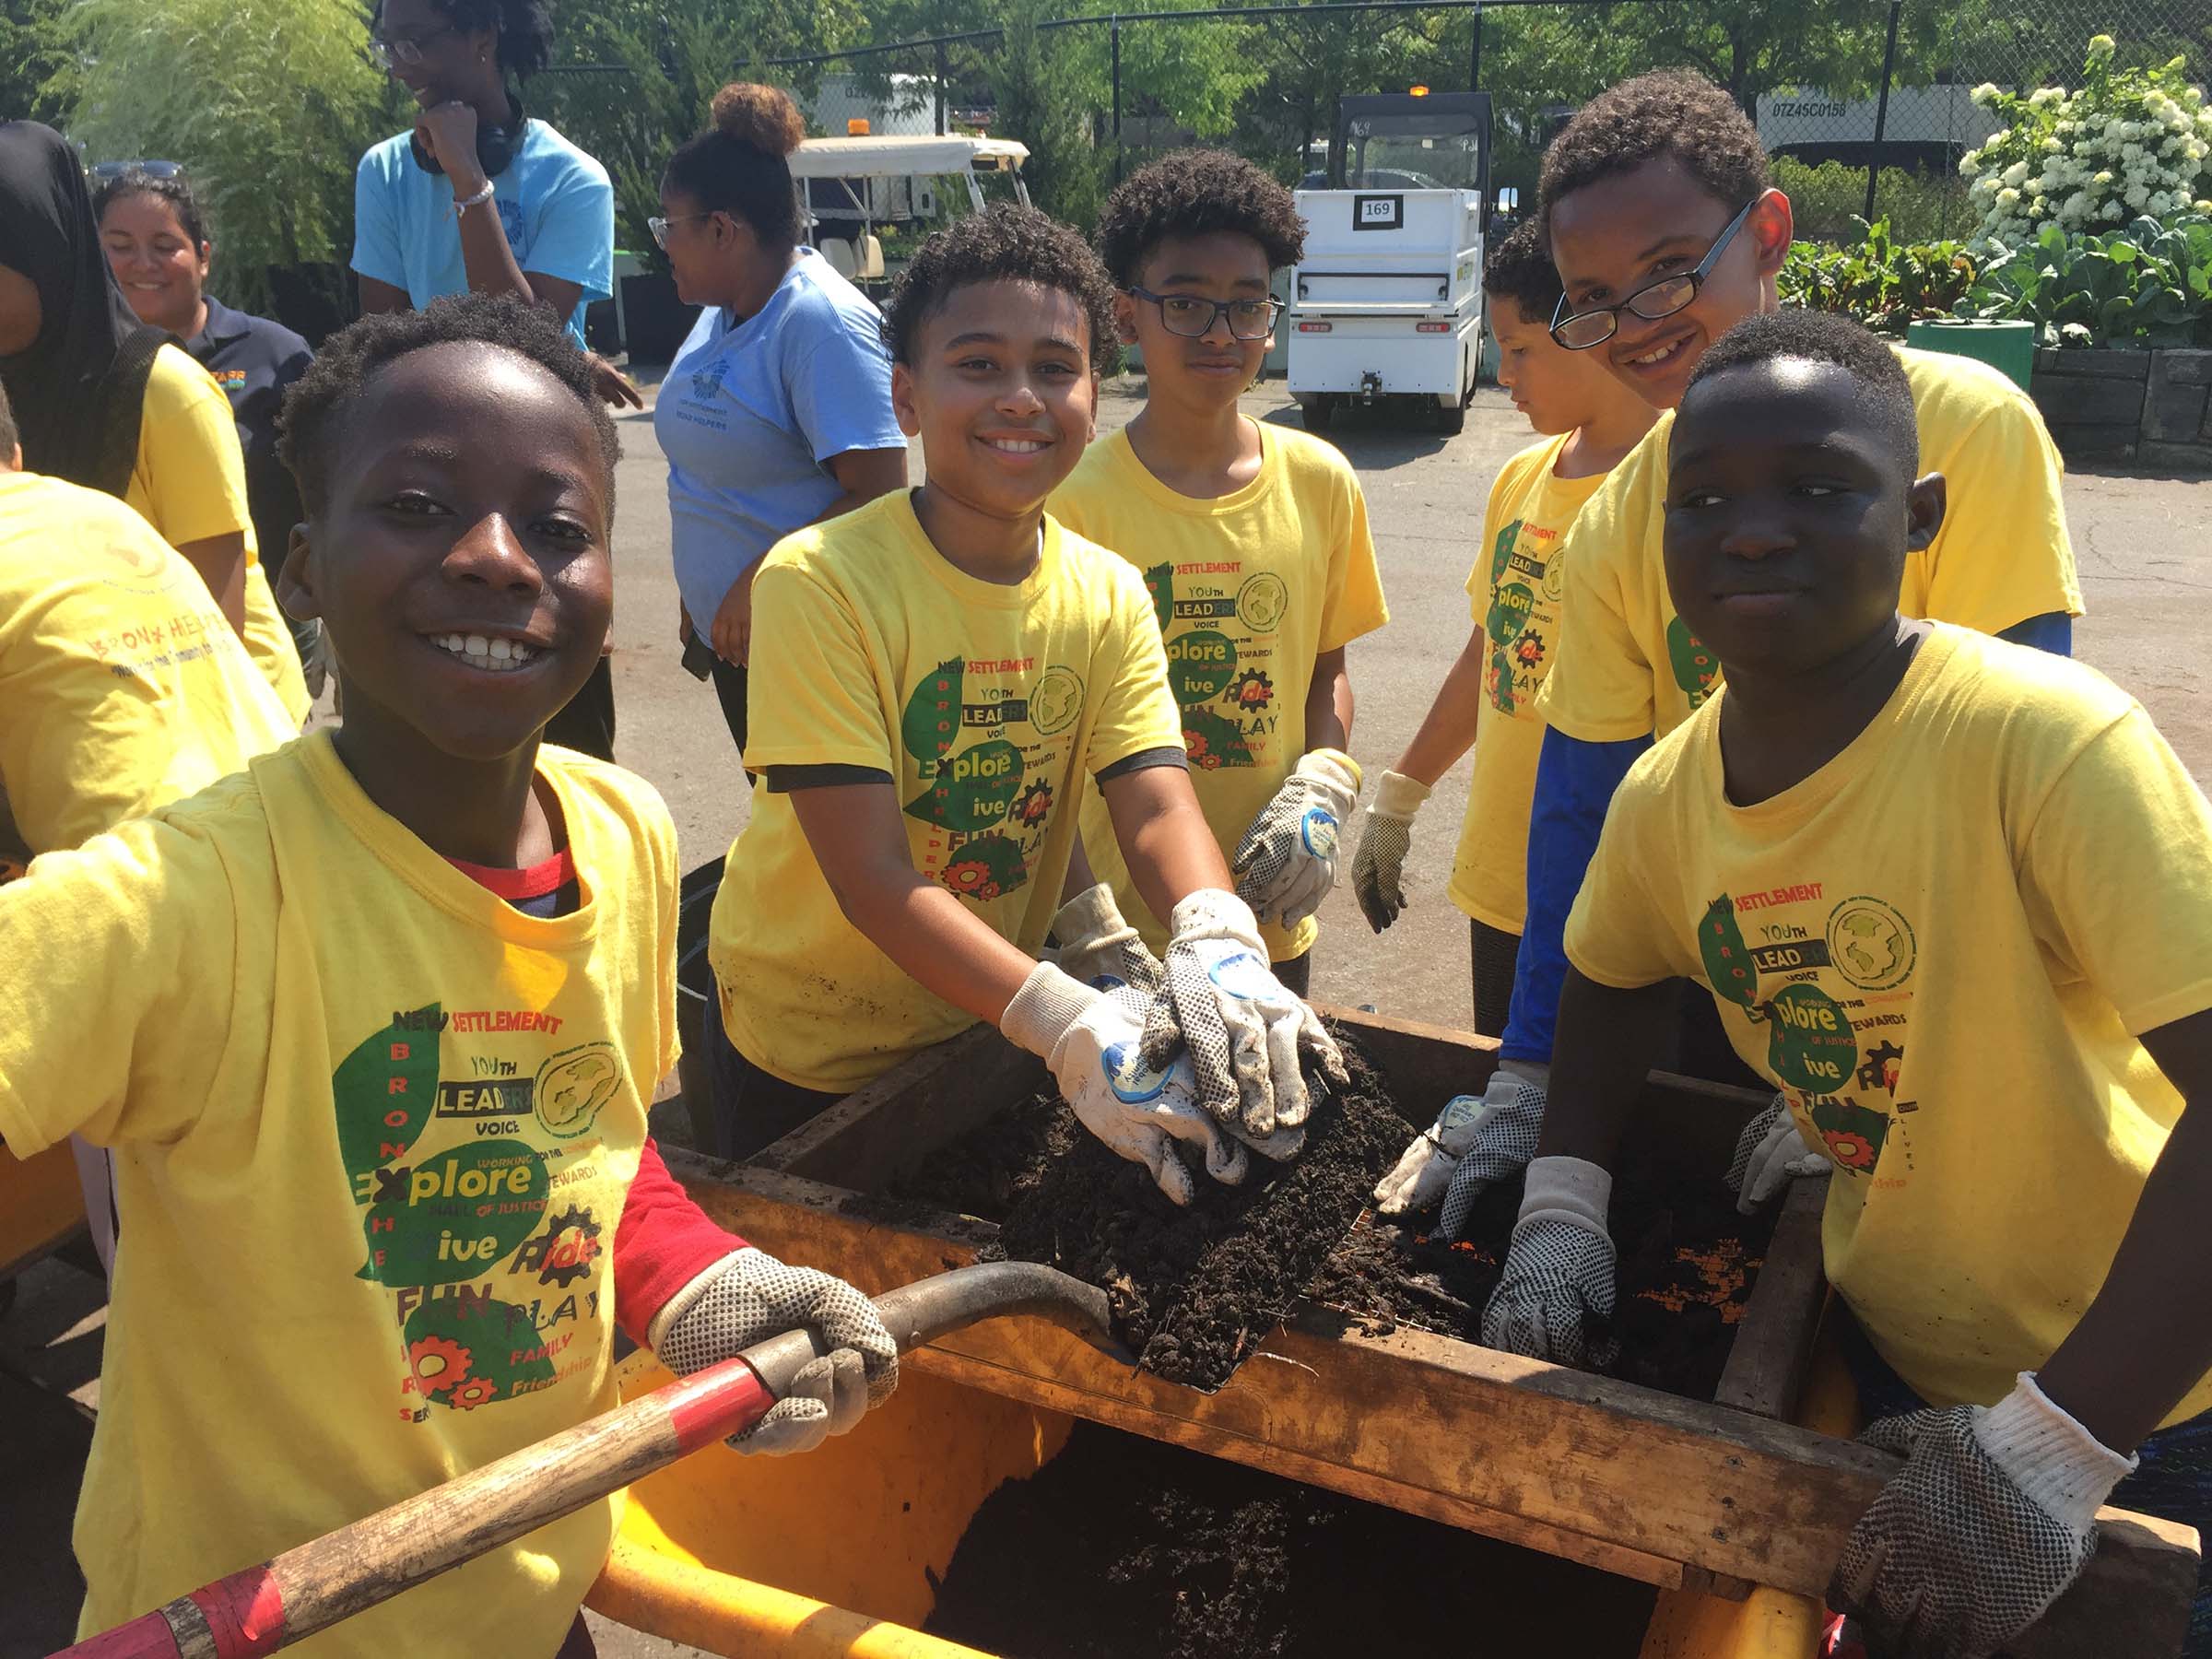 Learning about the soil, a group of kids in yellow shirts smile at the camera